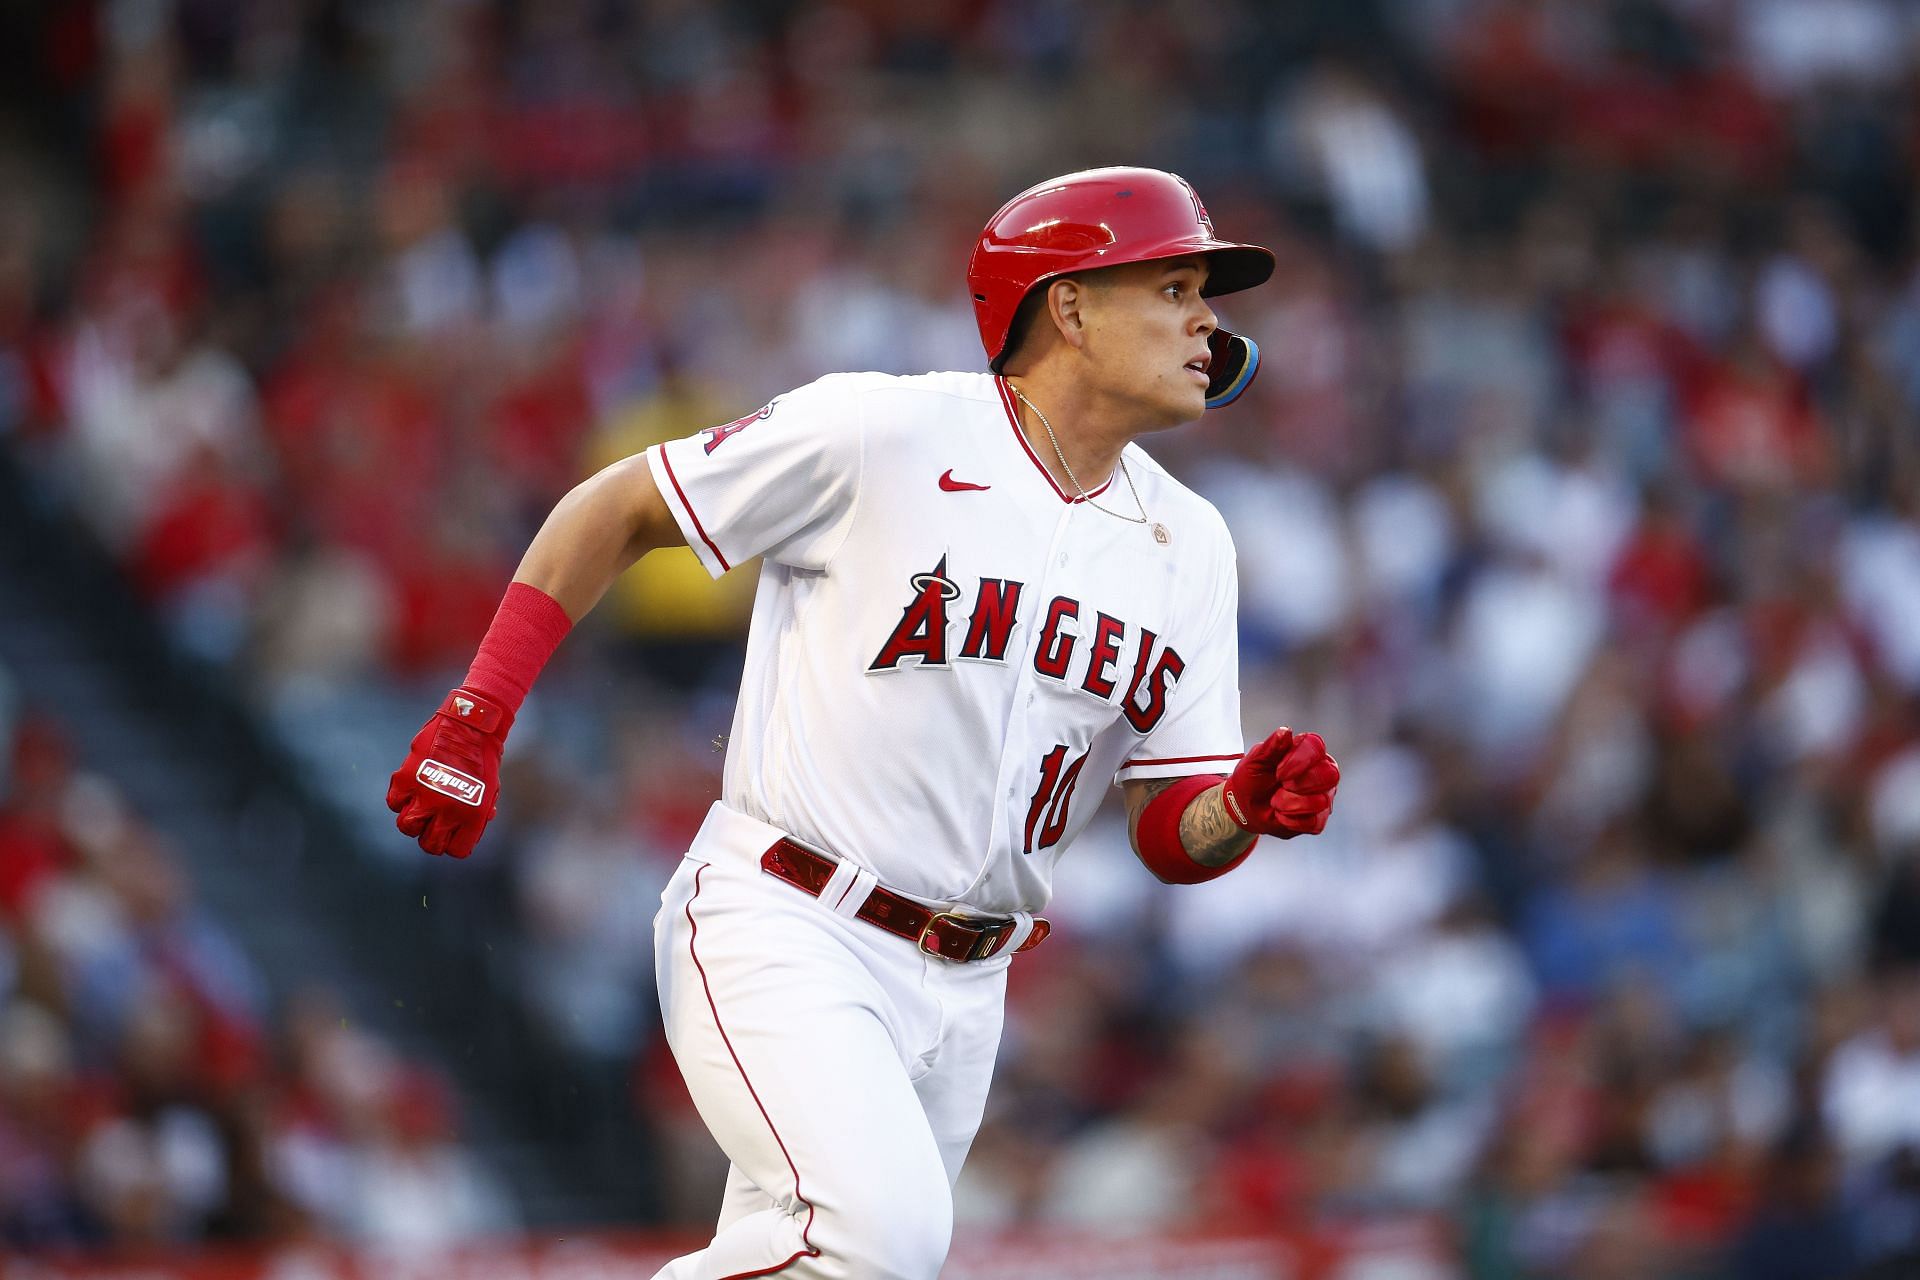 Gio Urshela of the Los Angeles Angels runs to first at Angel Stadium of Anaheim on June 8.